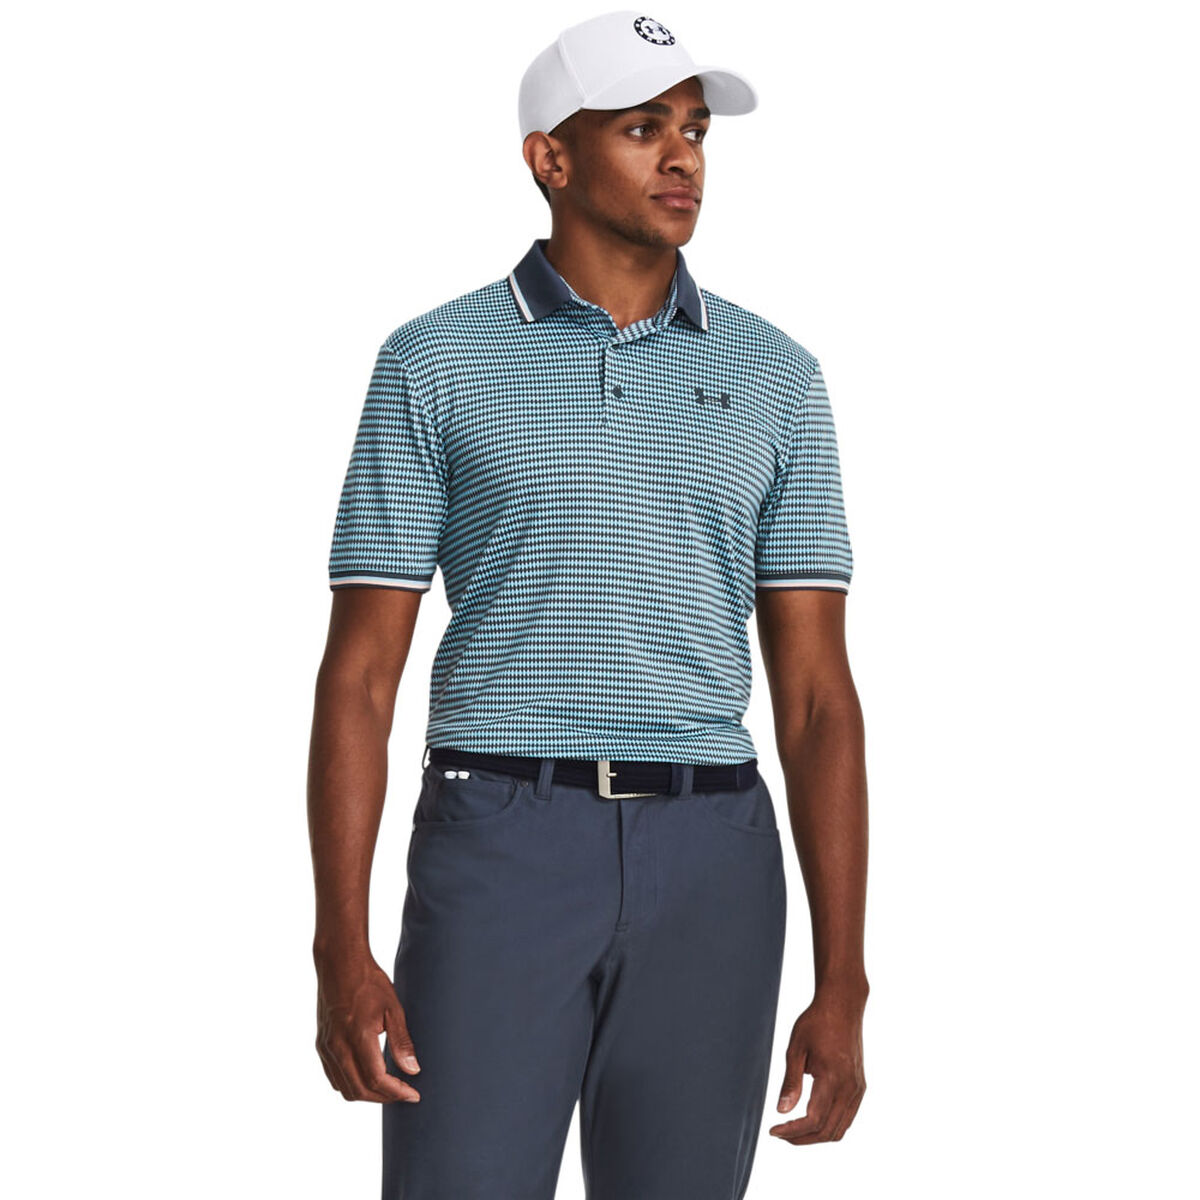 Under Armour Men’s Playoff 3.0 Rib Printed Golf Polo Shirt, Mens, Downpour gray/blizzard/gray, Small | American Golf